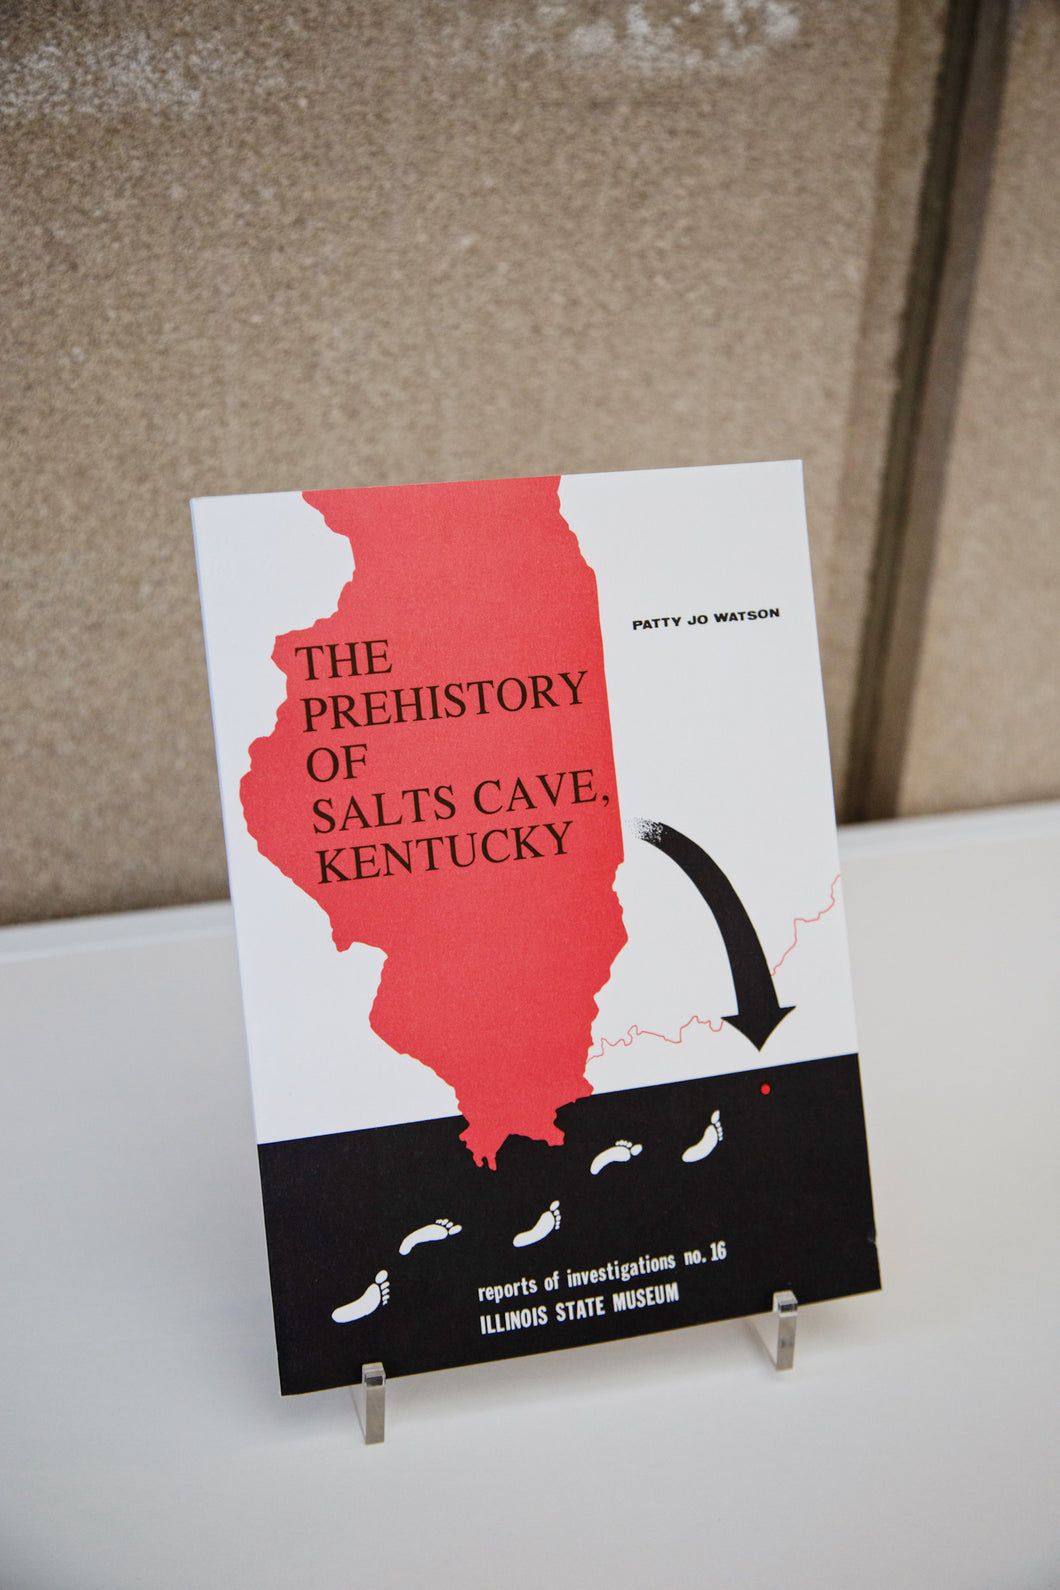 Cover photo of the book “The Prehistory of Salts Cave, Kentucky”.